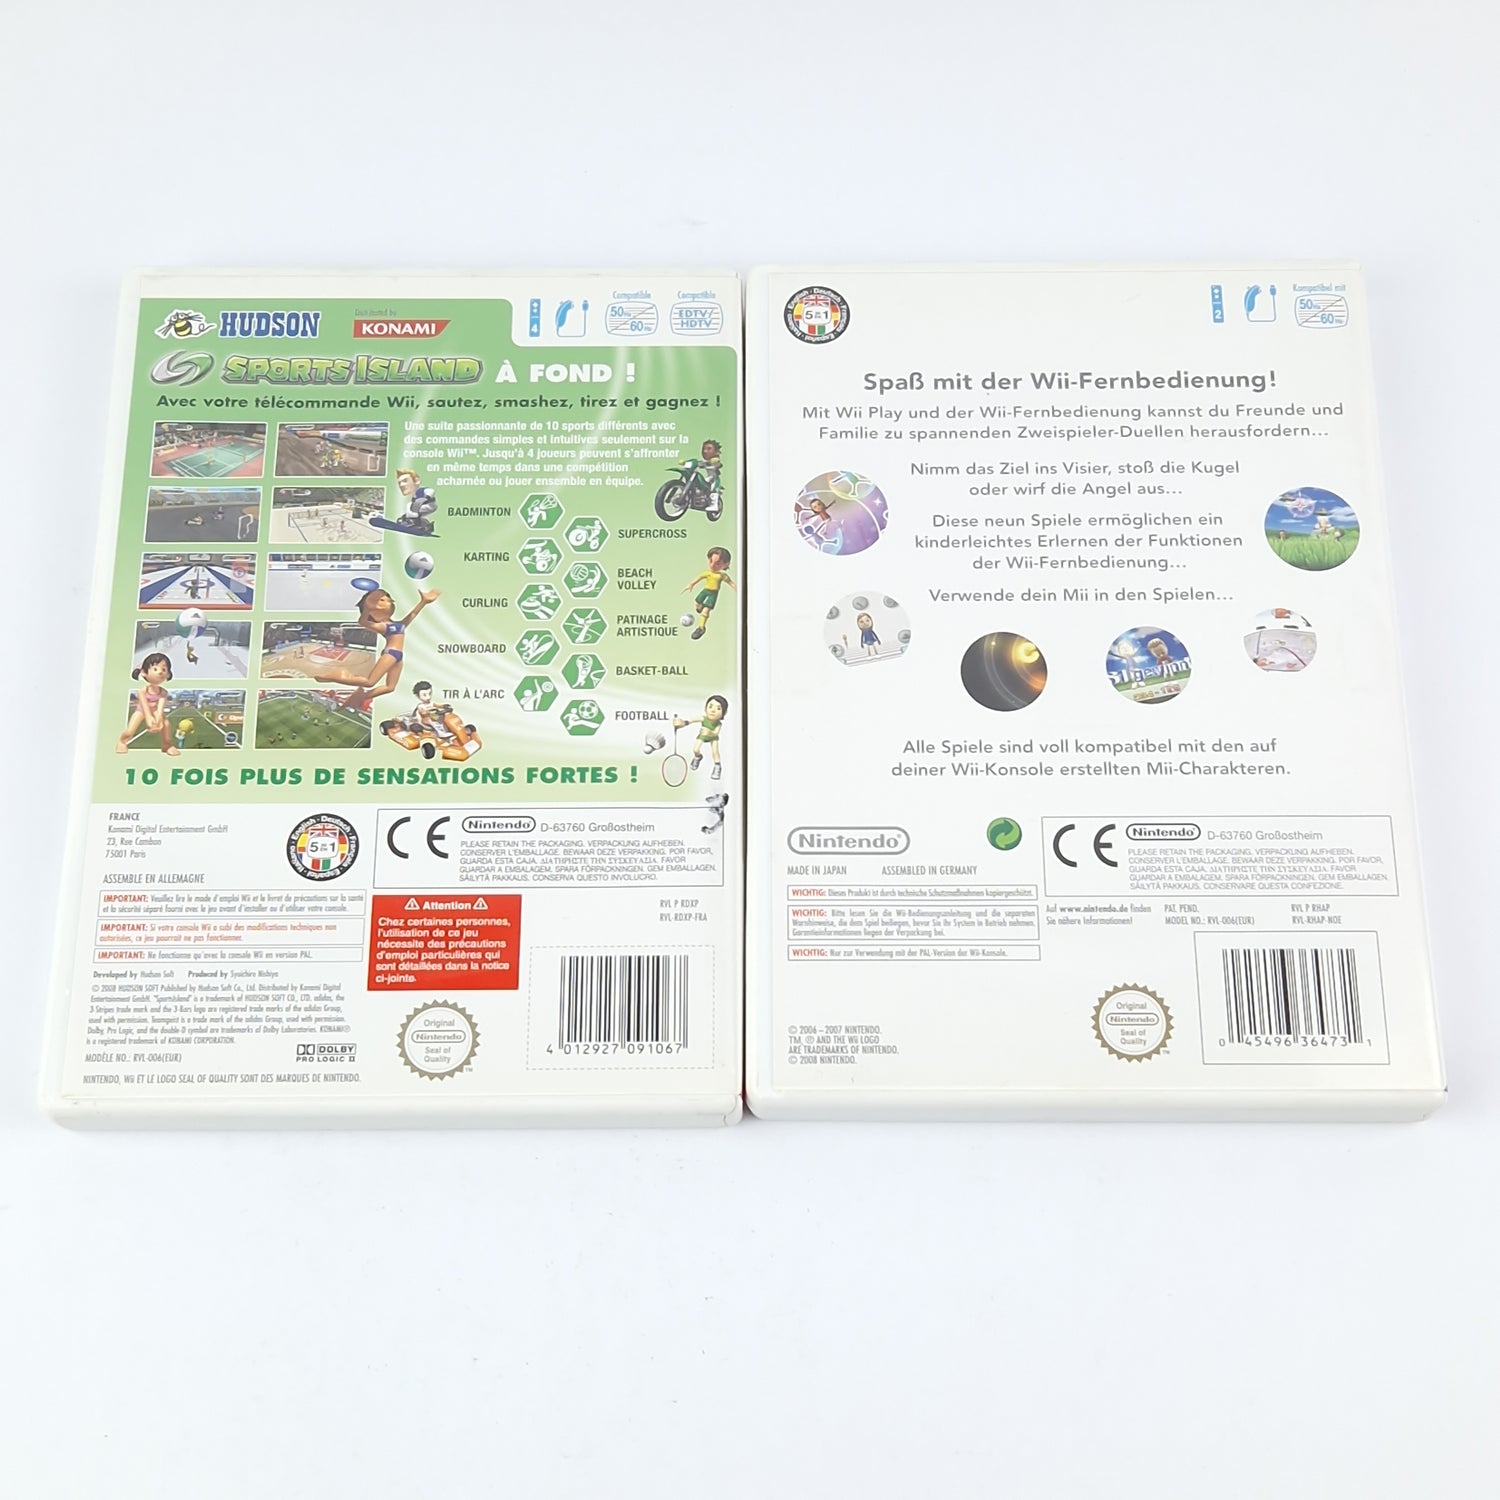 Nintendo Wii games: Sports Island & Wii Play as a bundle - original packaging instructions CD